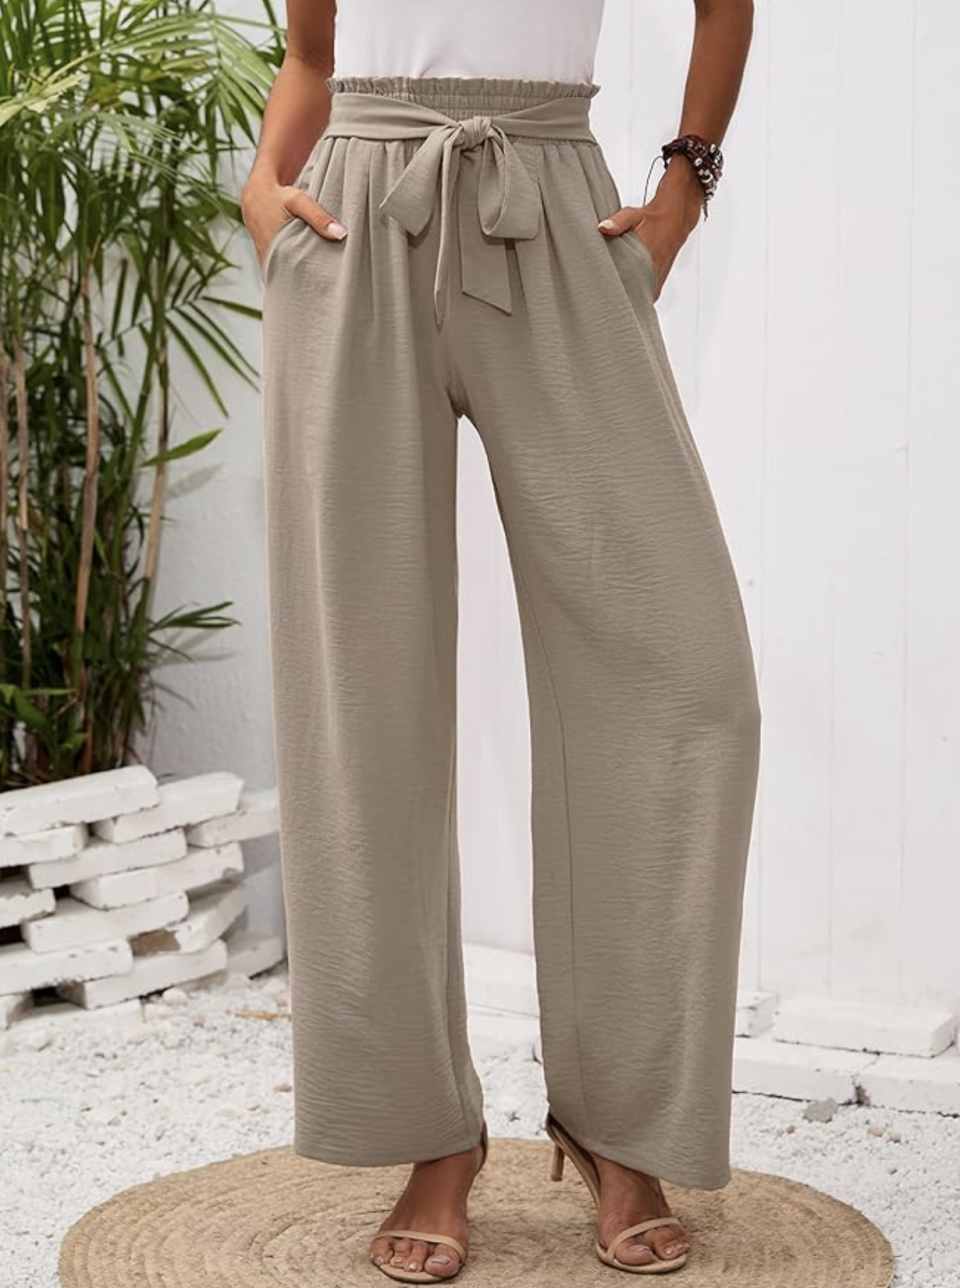 Heymoments Wide Leg Pants in Wheat (Photo via Amazon), Heymoments Wide Leg Women Pants Lightweiht Waisted Adjustable Tie Knot Loose Comfy Casual Trousers with Pocket S-2XL